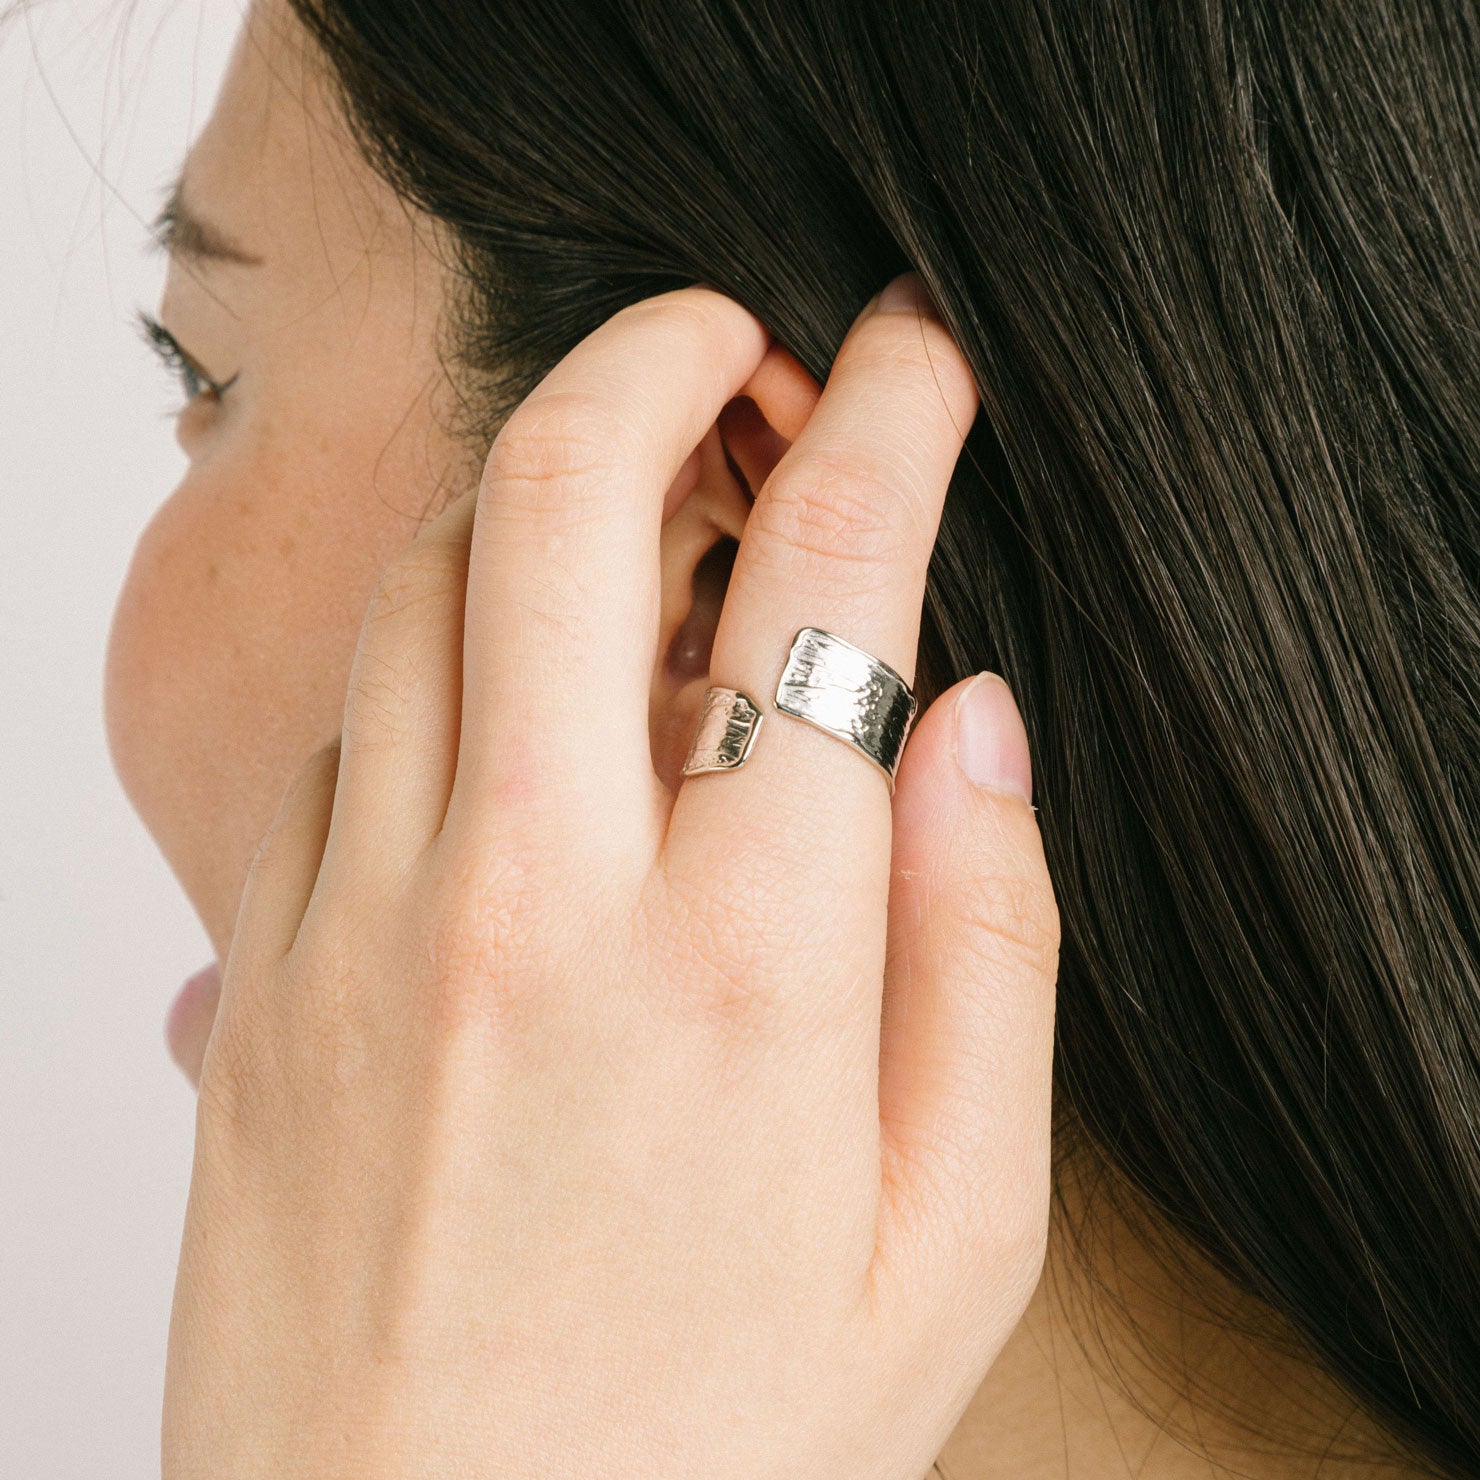 A model wearing the Textured Curl Ring in Silver offers adjustable sizing between 7-10, while crafted with stainless steel for long-lasting use. It is also water-resistant, non-tarnishing, and free of lead, nickel, and cadmium. Note: this is a single ring.